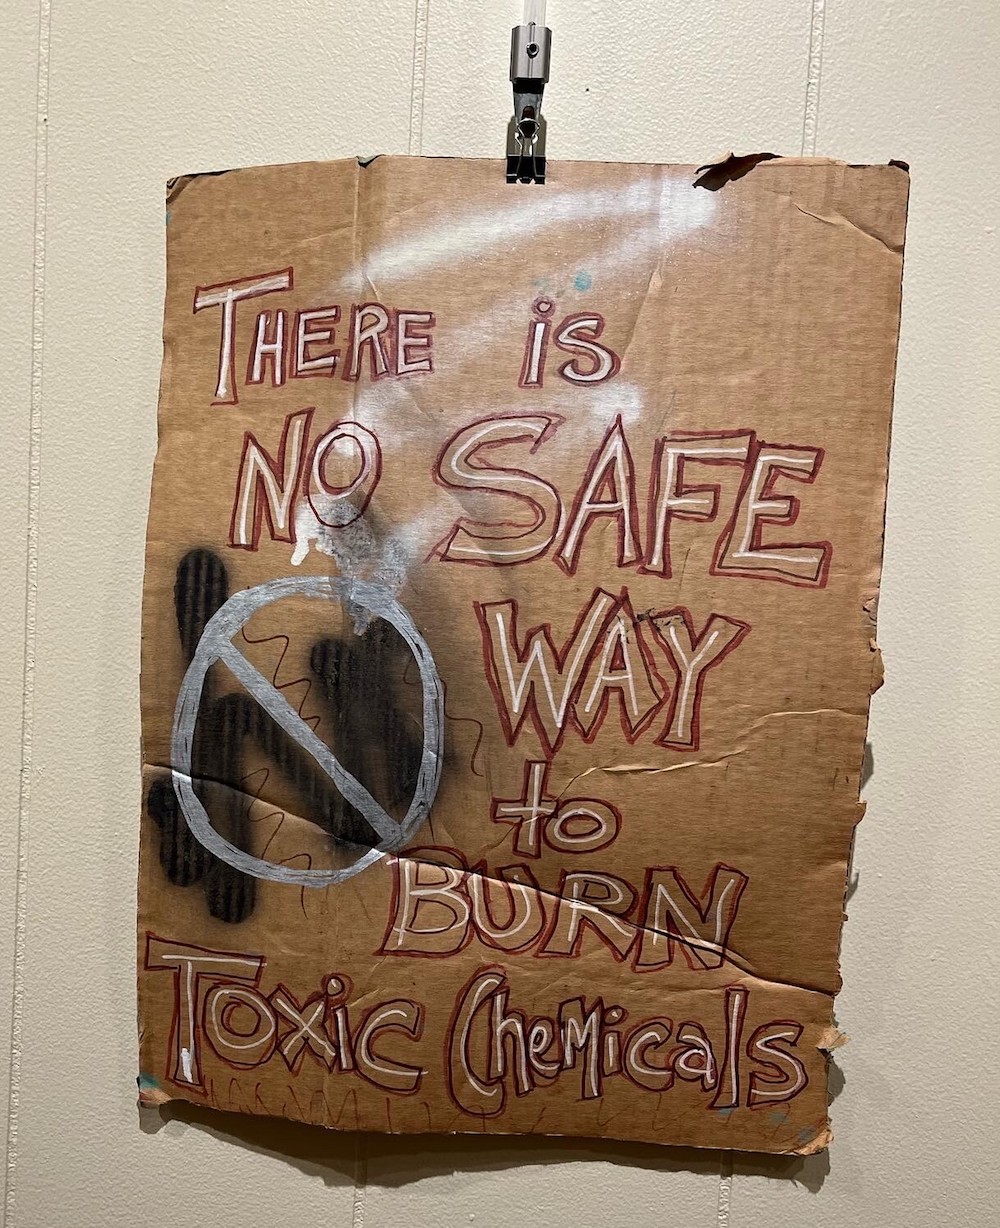 A sign reads: “There is no safe way to burn toxic chemicals”